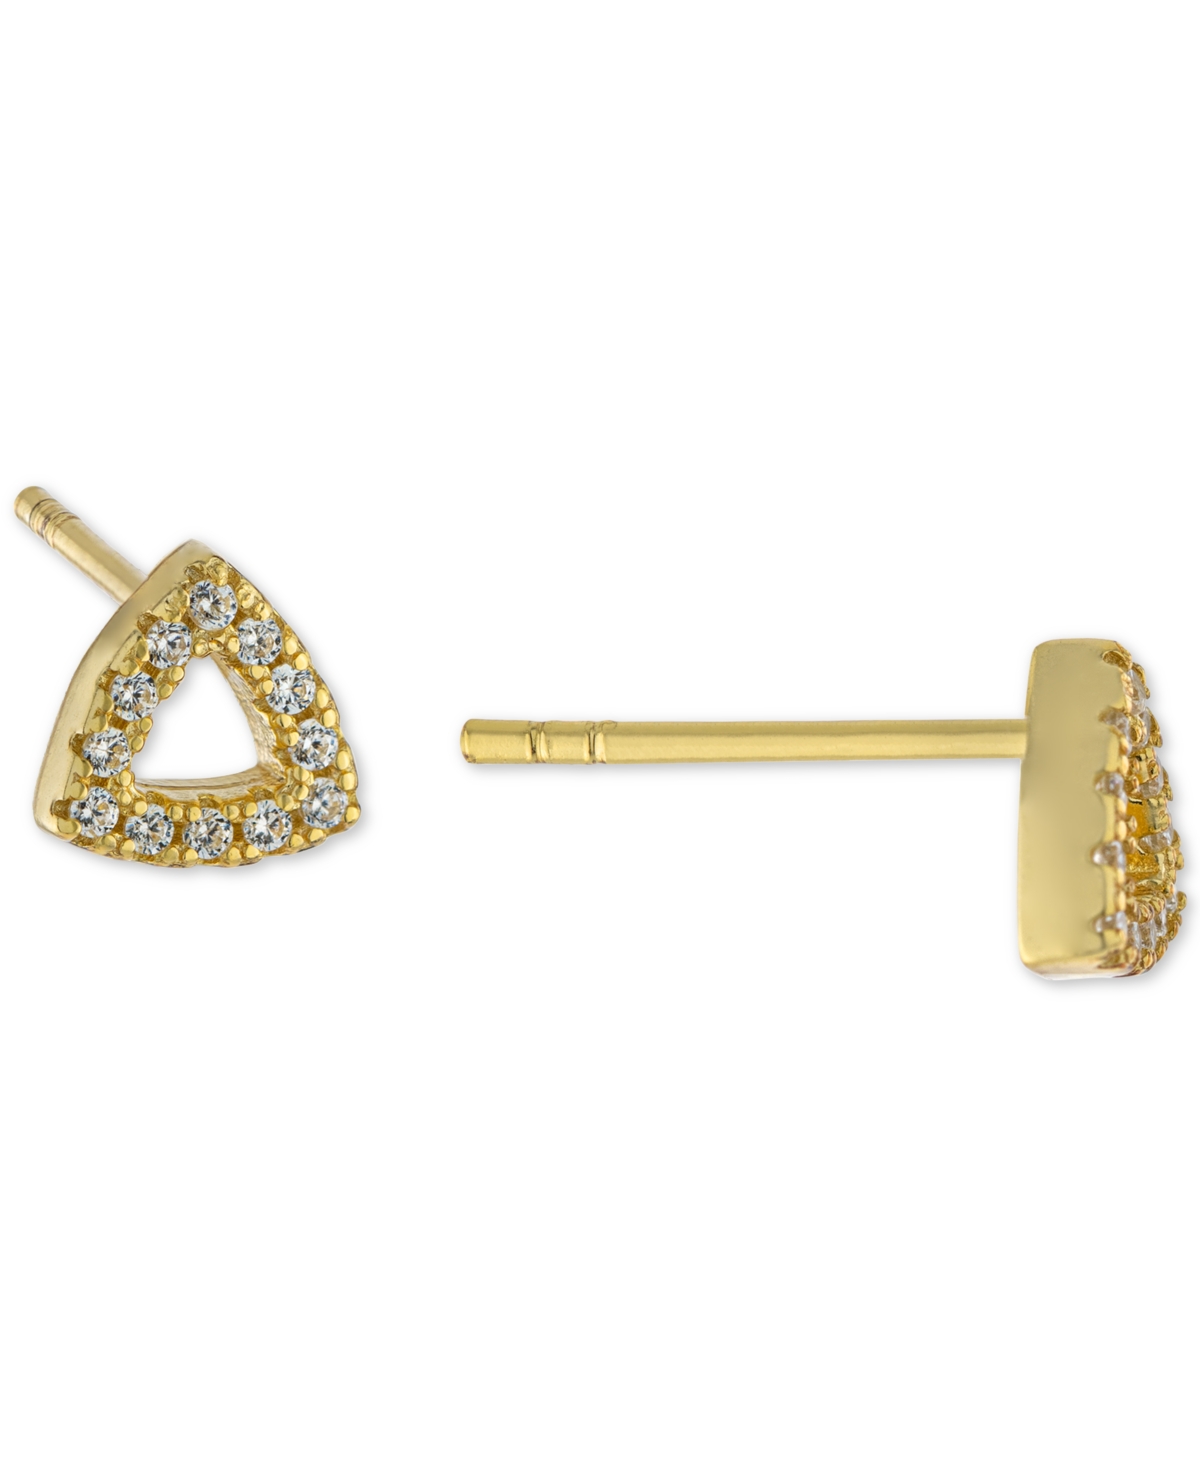 Cubic Zirconia Triangle Stud Earrings in Gold-Plated Sterling Silver, Created for Macy's - Yellow Gold